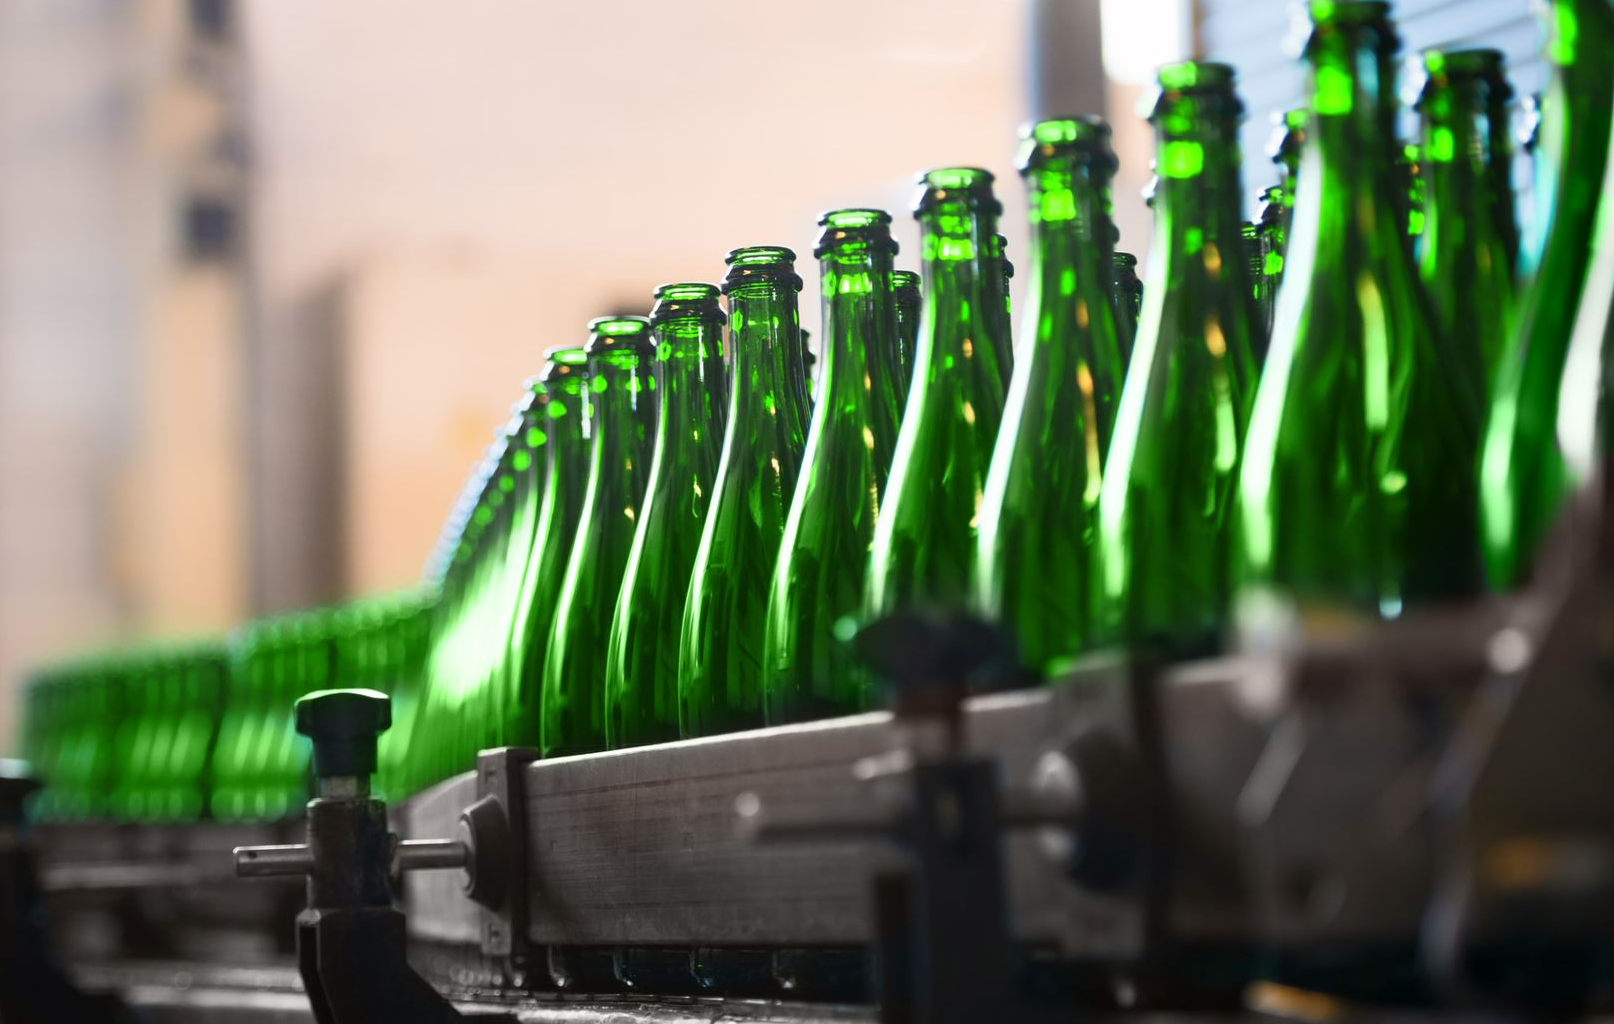 Inspection and dimensional measurement of glass bottle